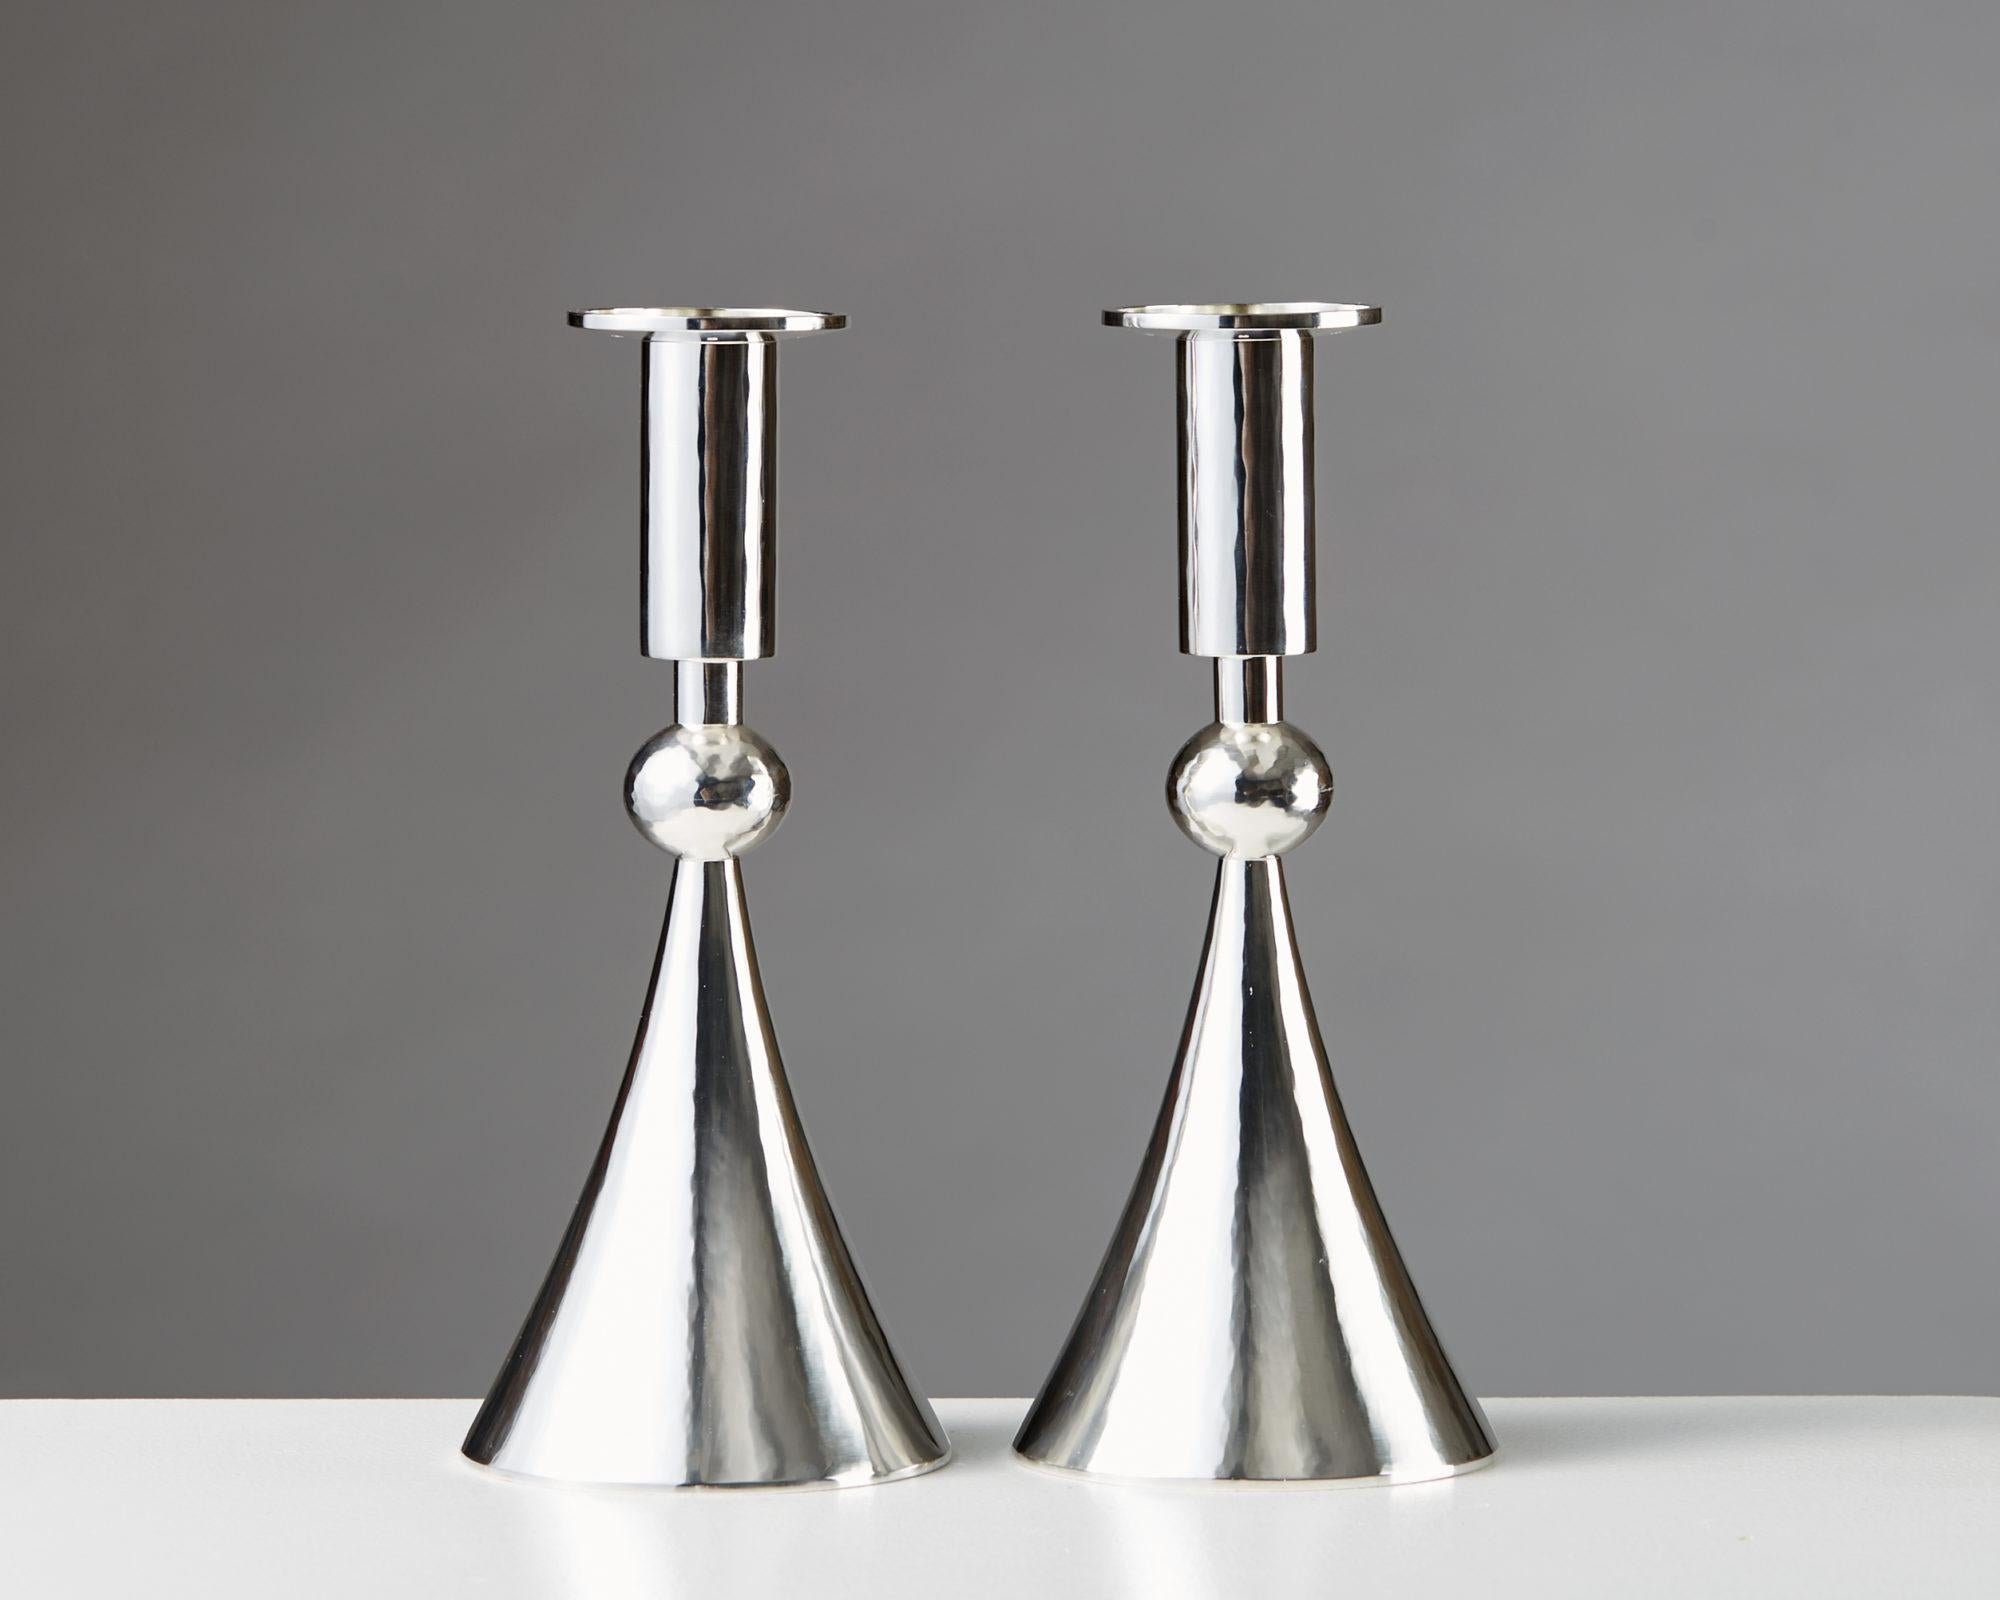 Pair of Candlesticks Designed by Sigurd Persson, Sterling Silver, Sweden, 1964 For Sale 2